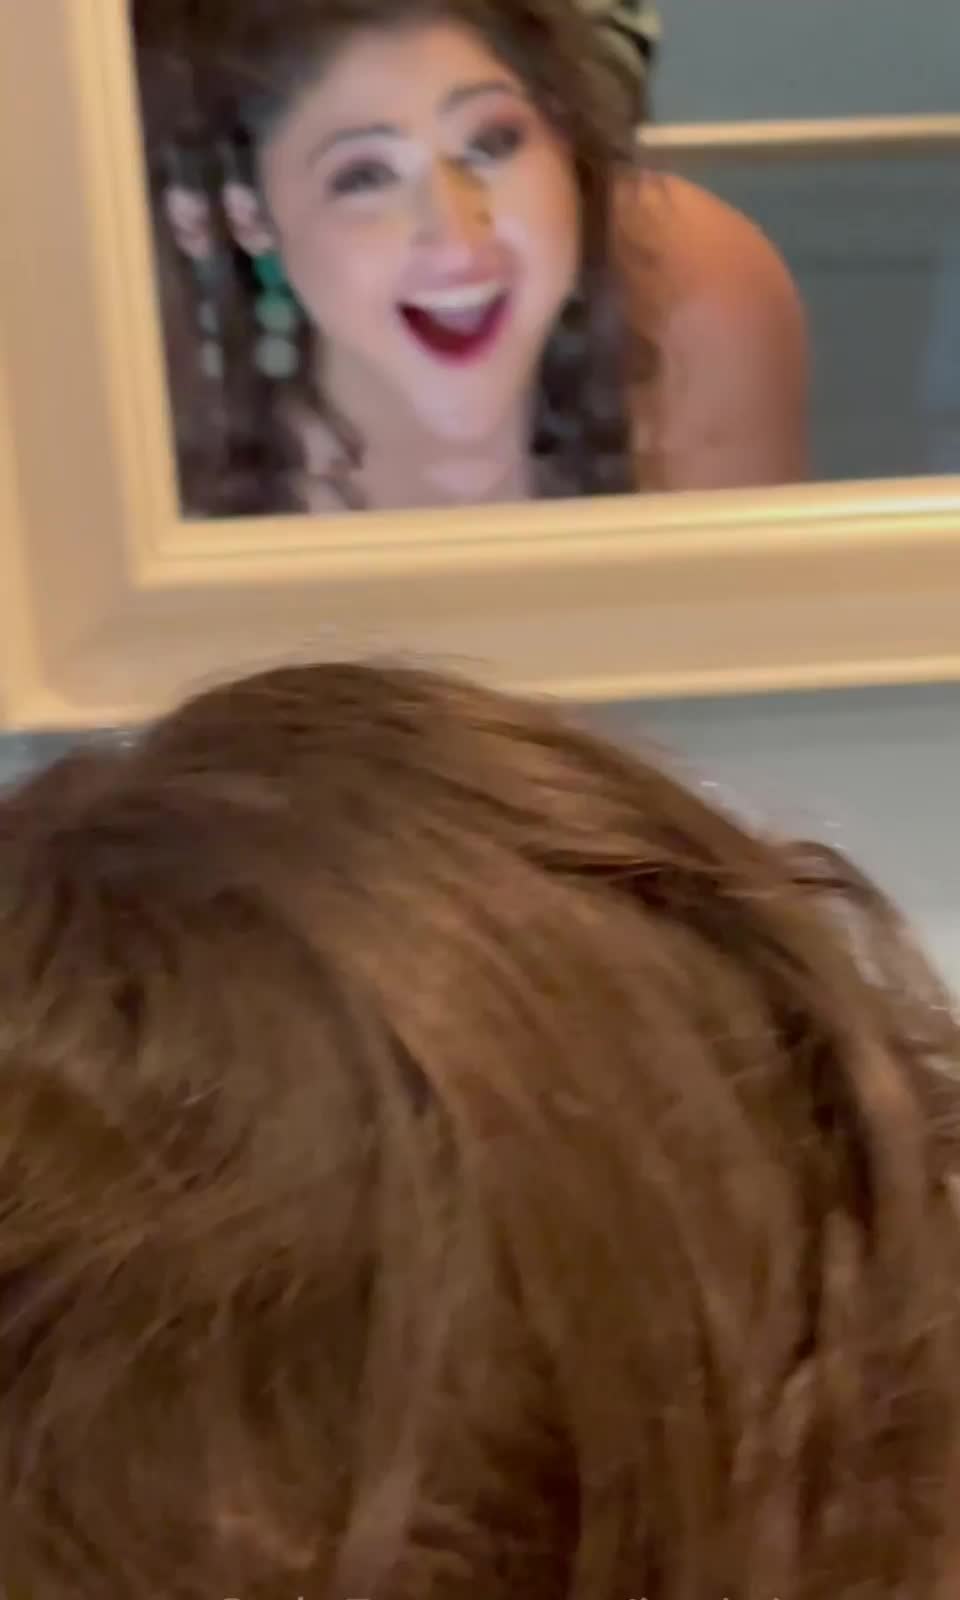 Watching my face in the mirror as he fucks me : video clip